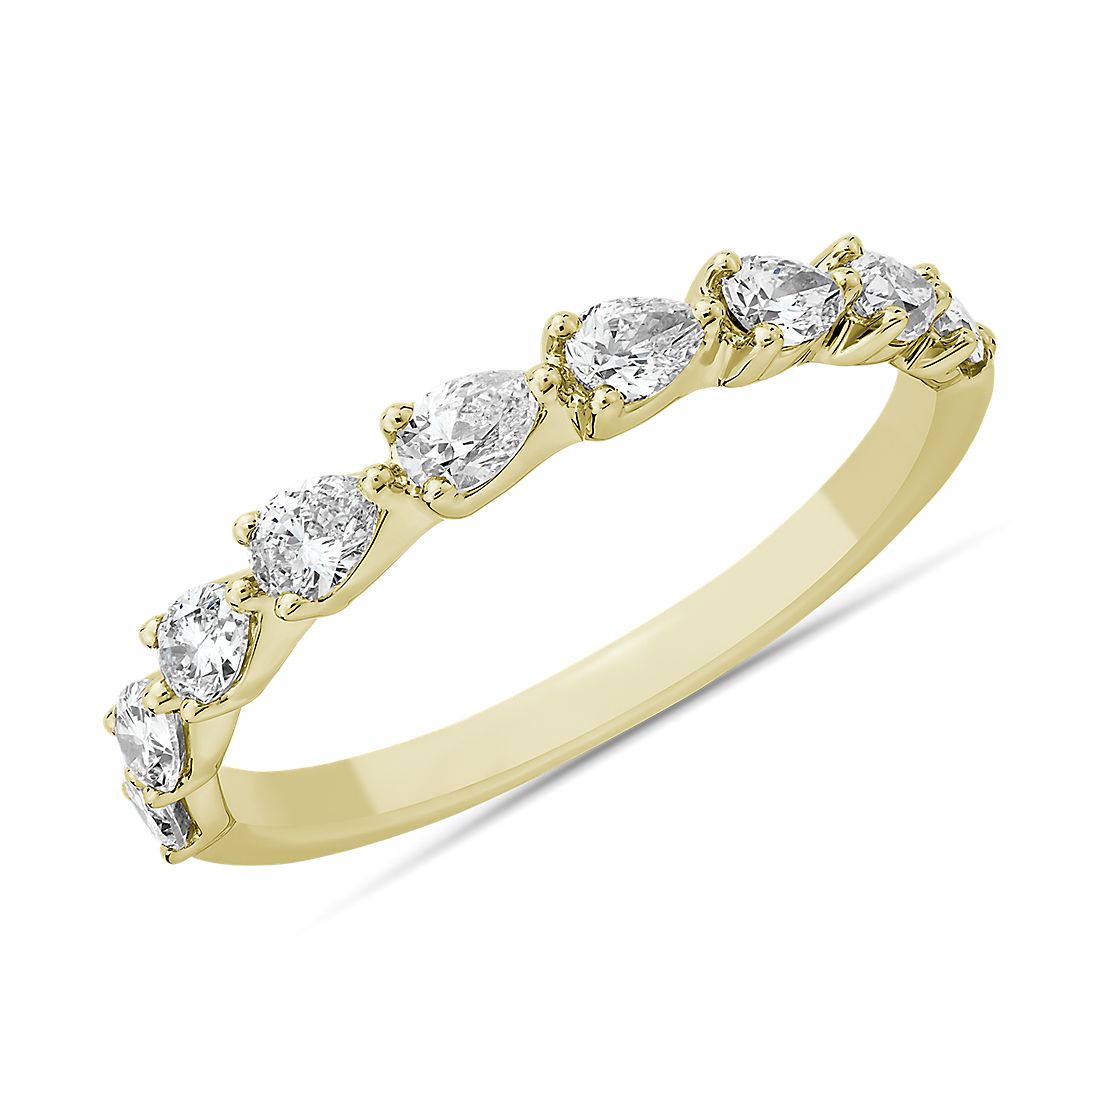 East-West 9-Stone Pear Diamond Anniversary Ring in 14k Yellow Gold (1/2 ct. tw.)